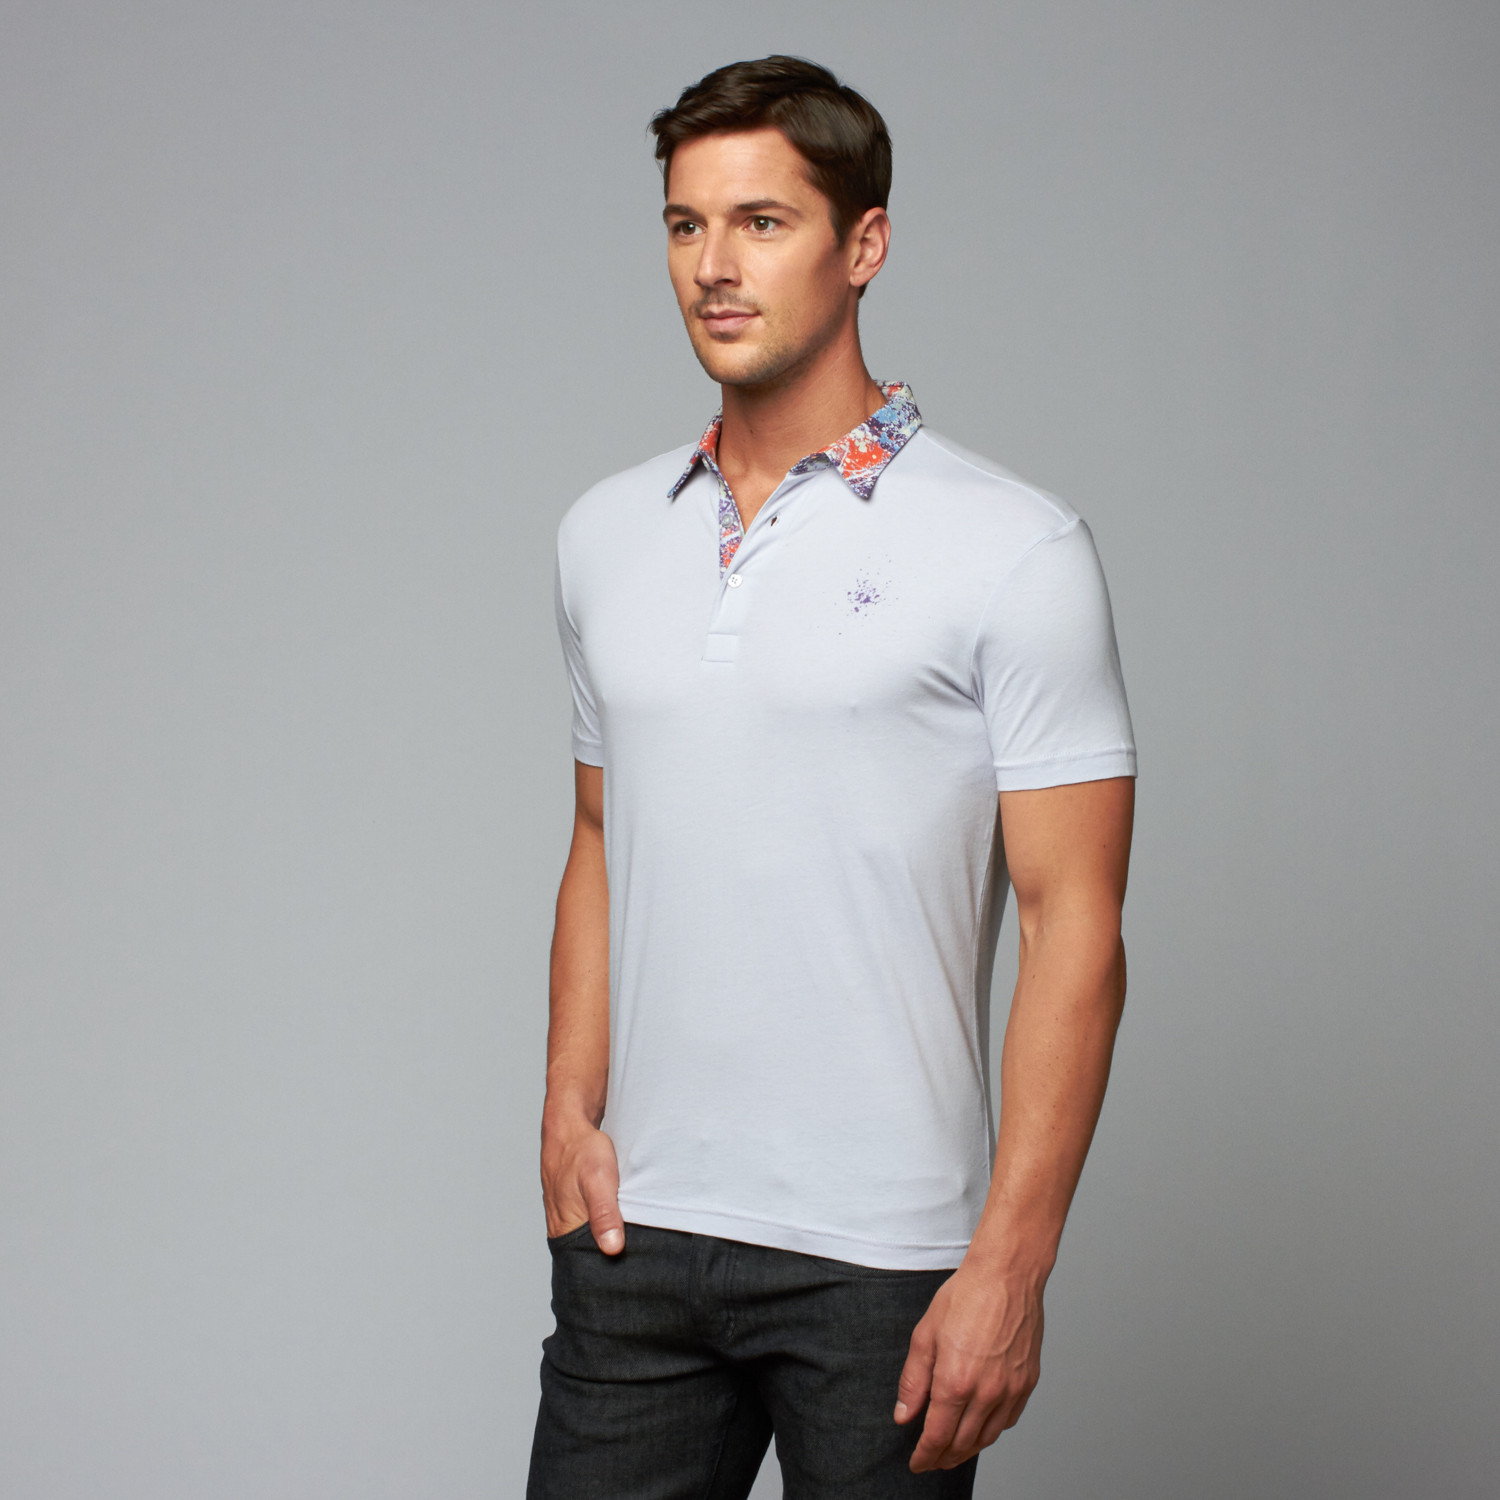 Drew’s Palette Polo // Blue (M) - 611 - Touch of Modern